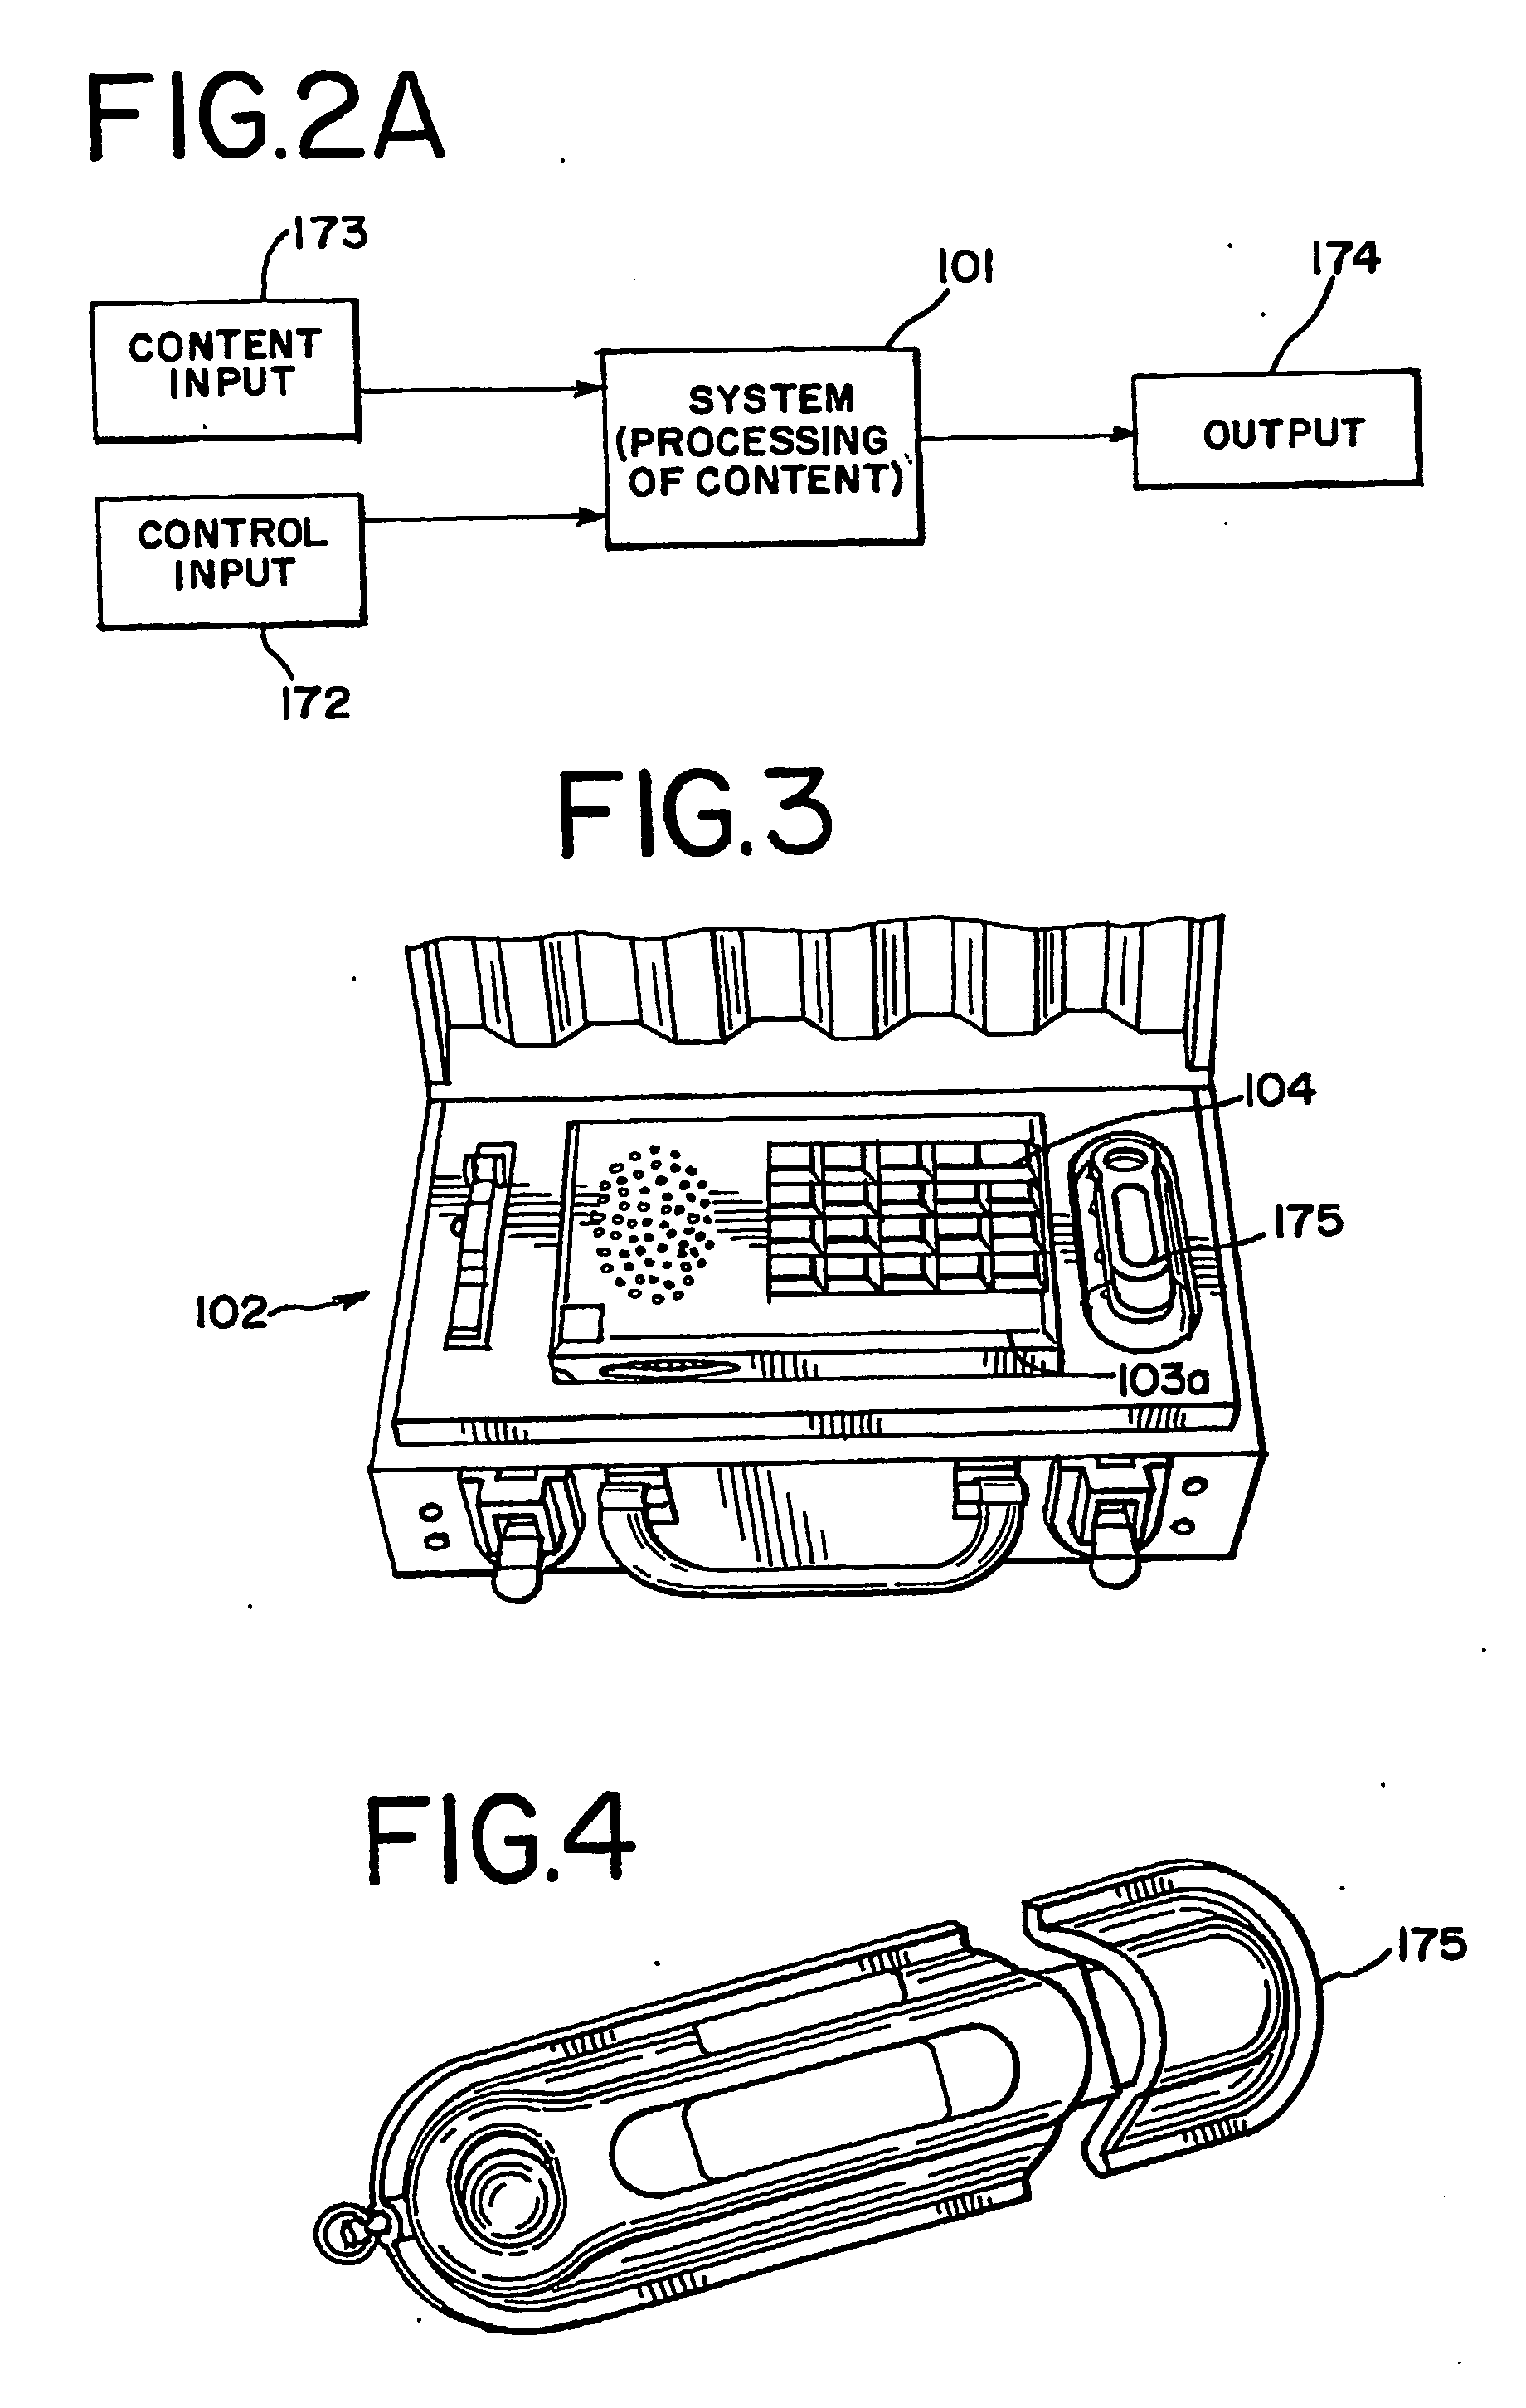 Content communication system and methods